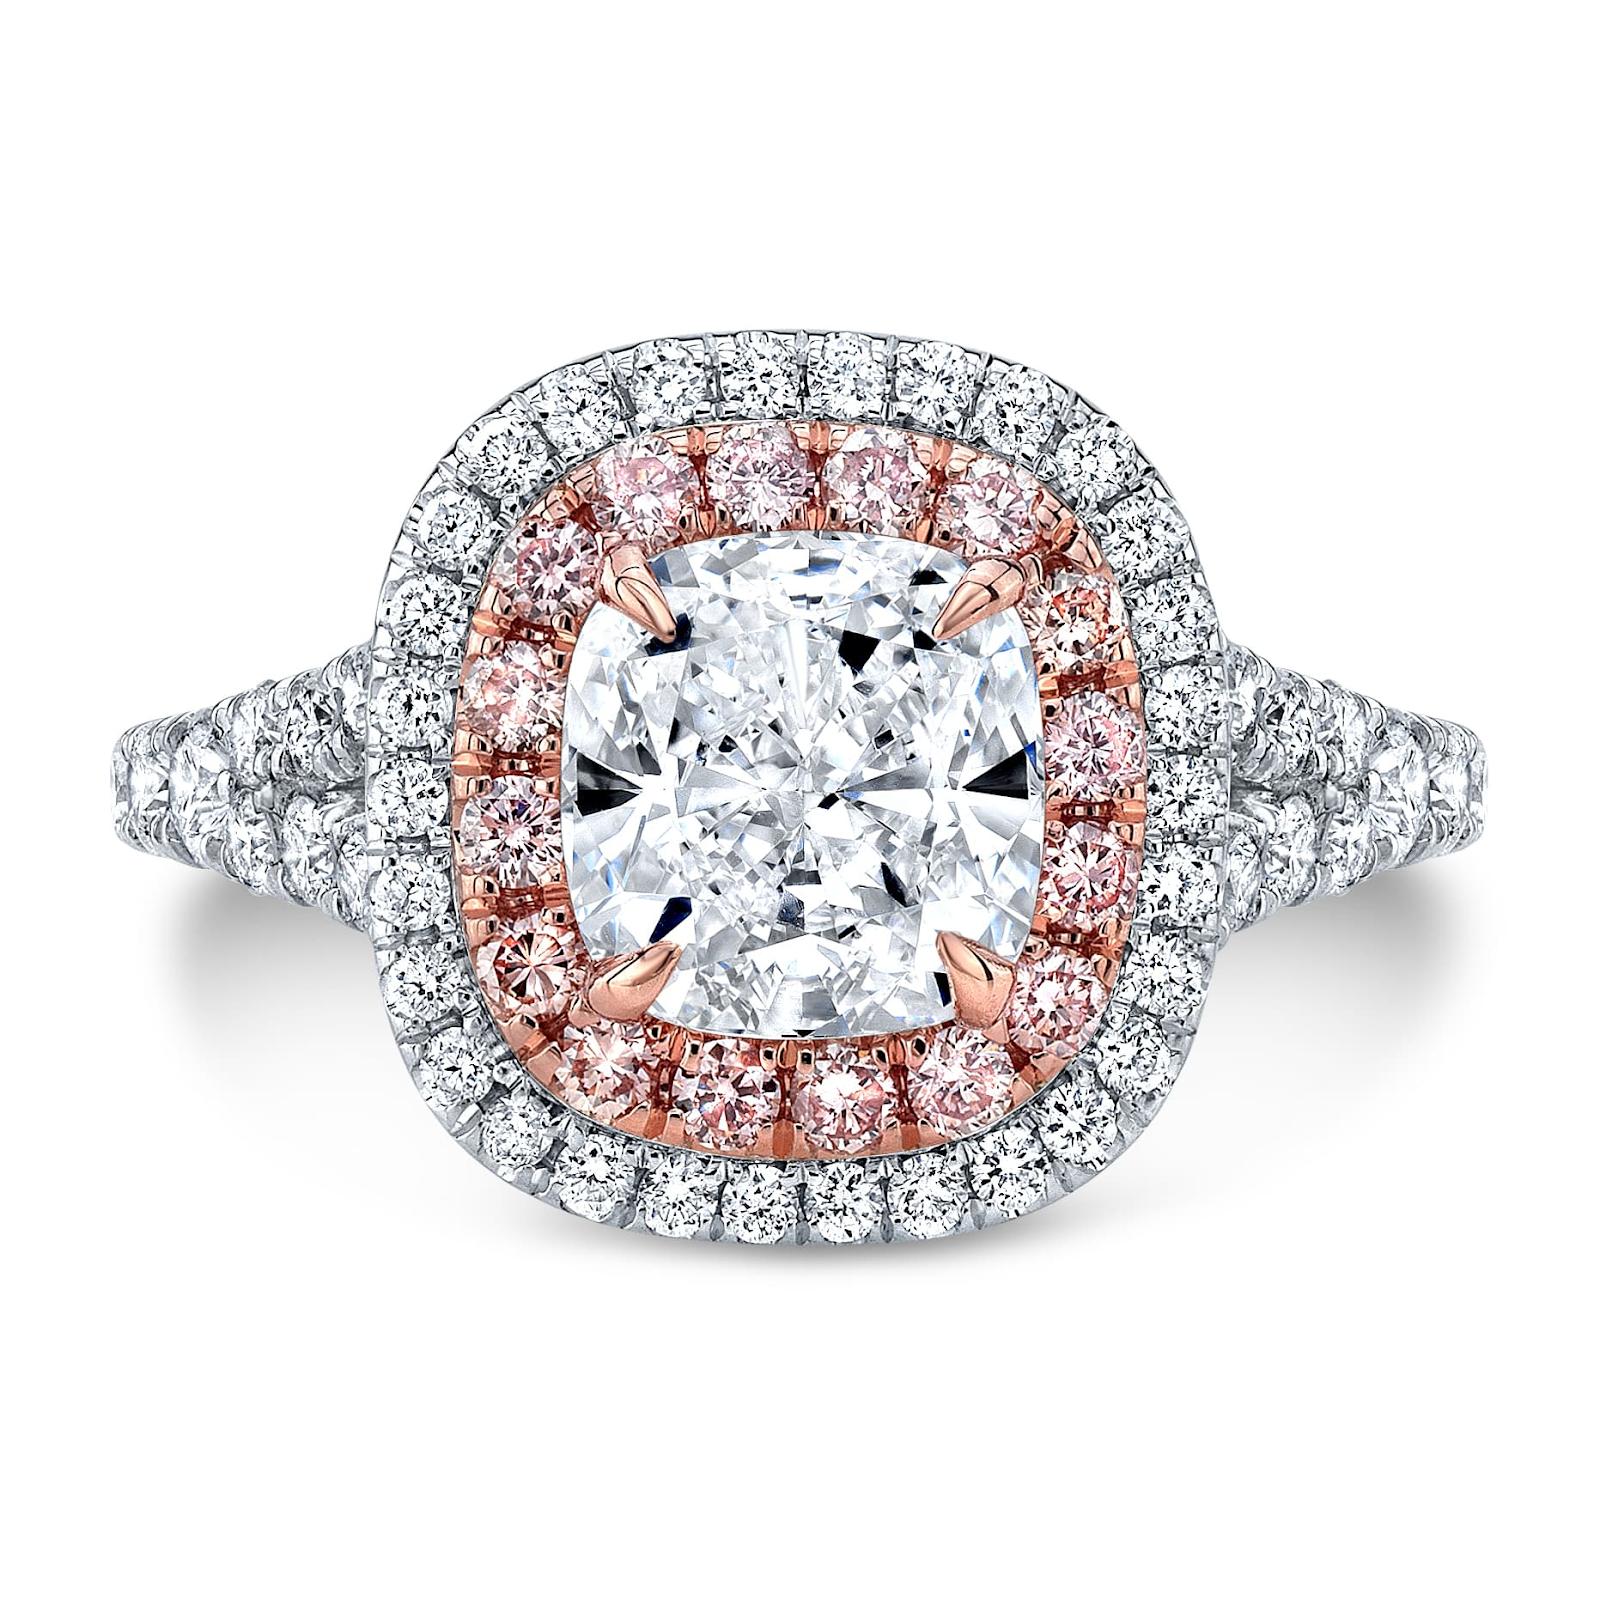 30 Most Expensive Celebrity Engagement Rings